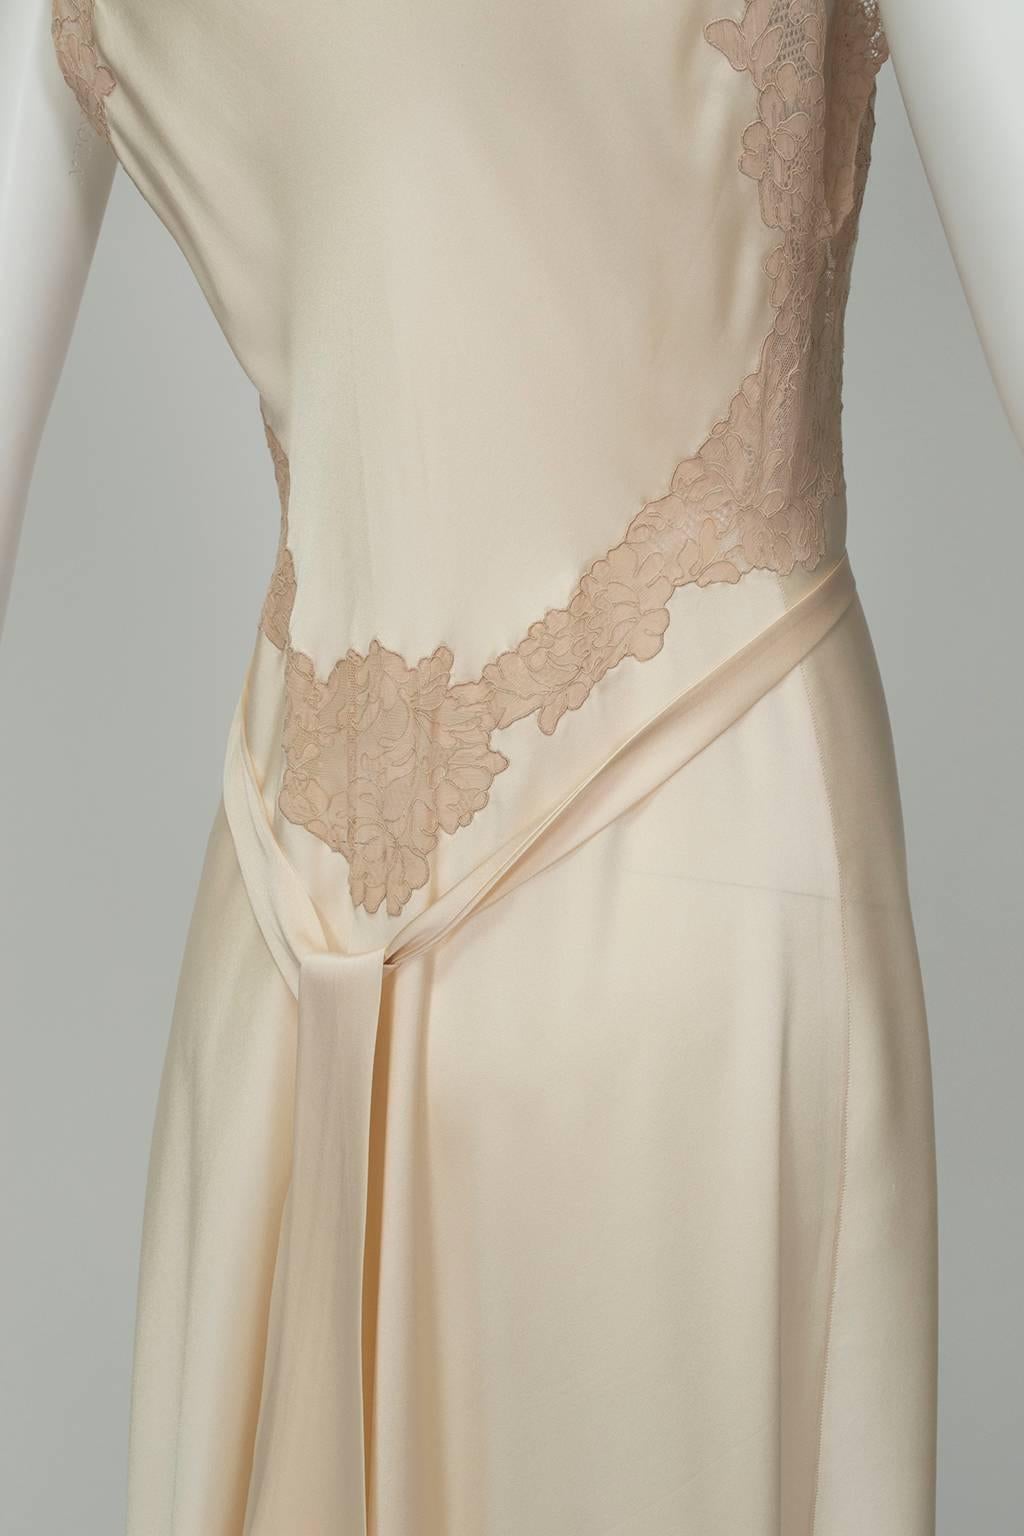 Nude Hollywood Regency Charmeuse and Lace Peignoir Dressing Gown - Medium, 1930s 2